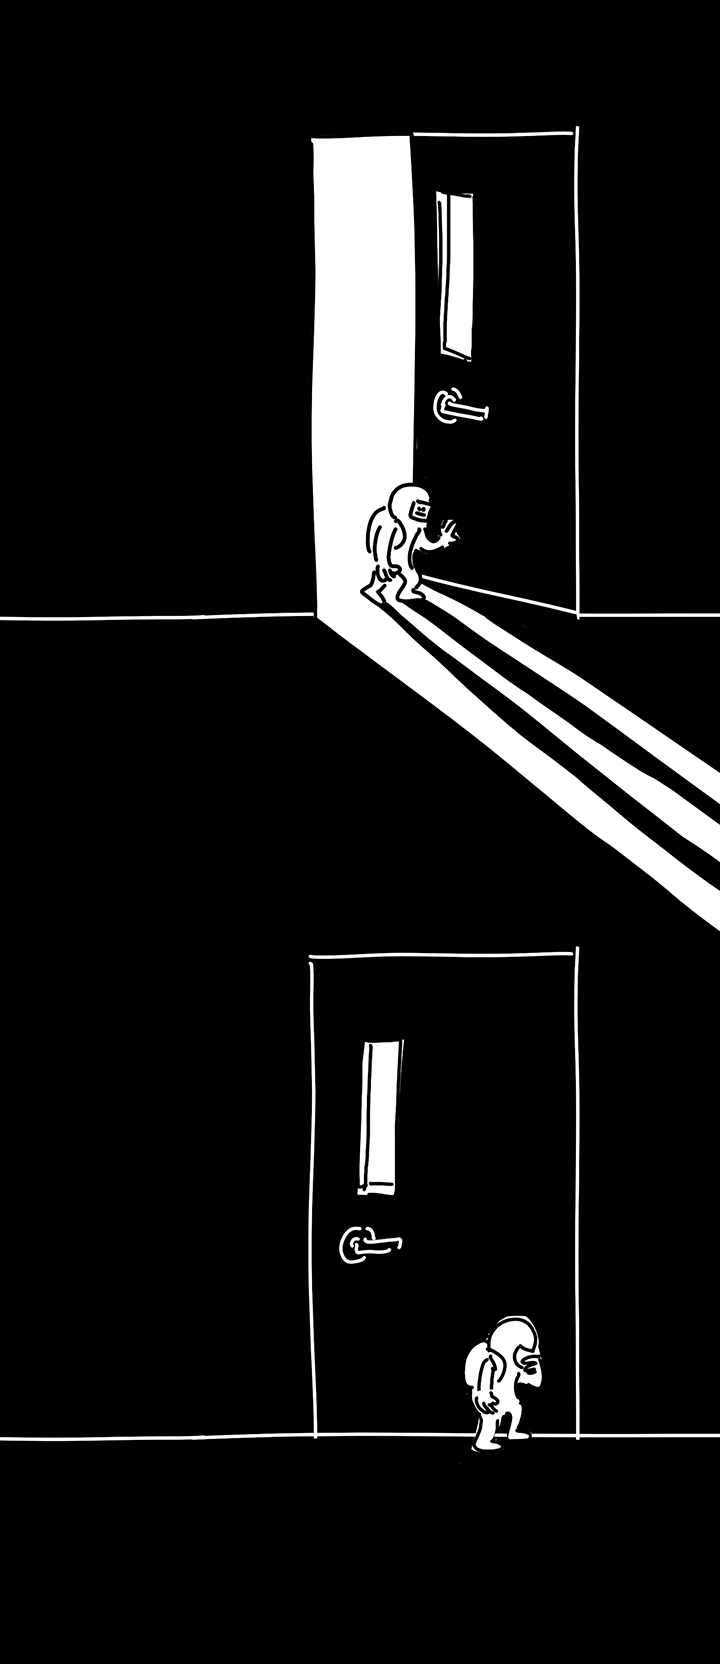 Panel 16: The kid exits the room through the door into the dark hallway. They are slightly slumped and pushing on the door. They cast a long shadow that extends off the page. Panel 17: The door is closed and the kid is standing in the dark hallway. They reach up for the piece of paper on their face tiredly.